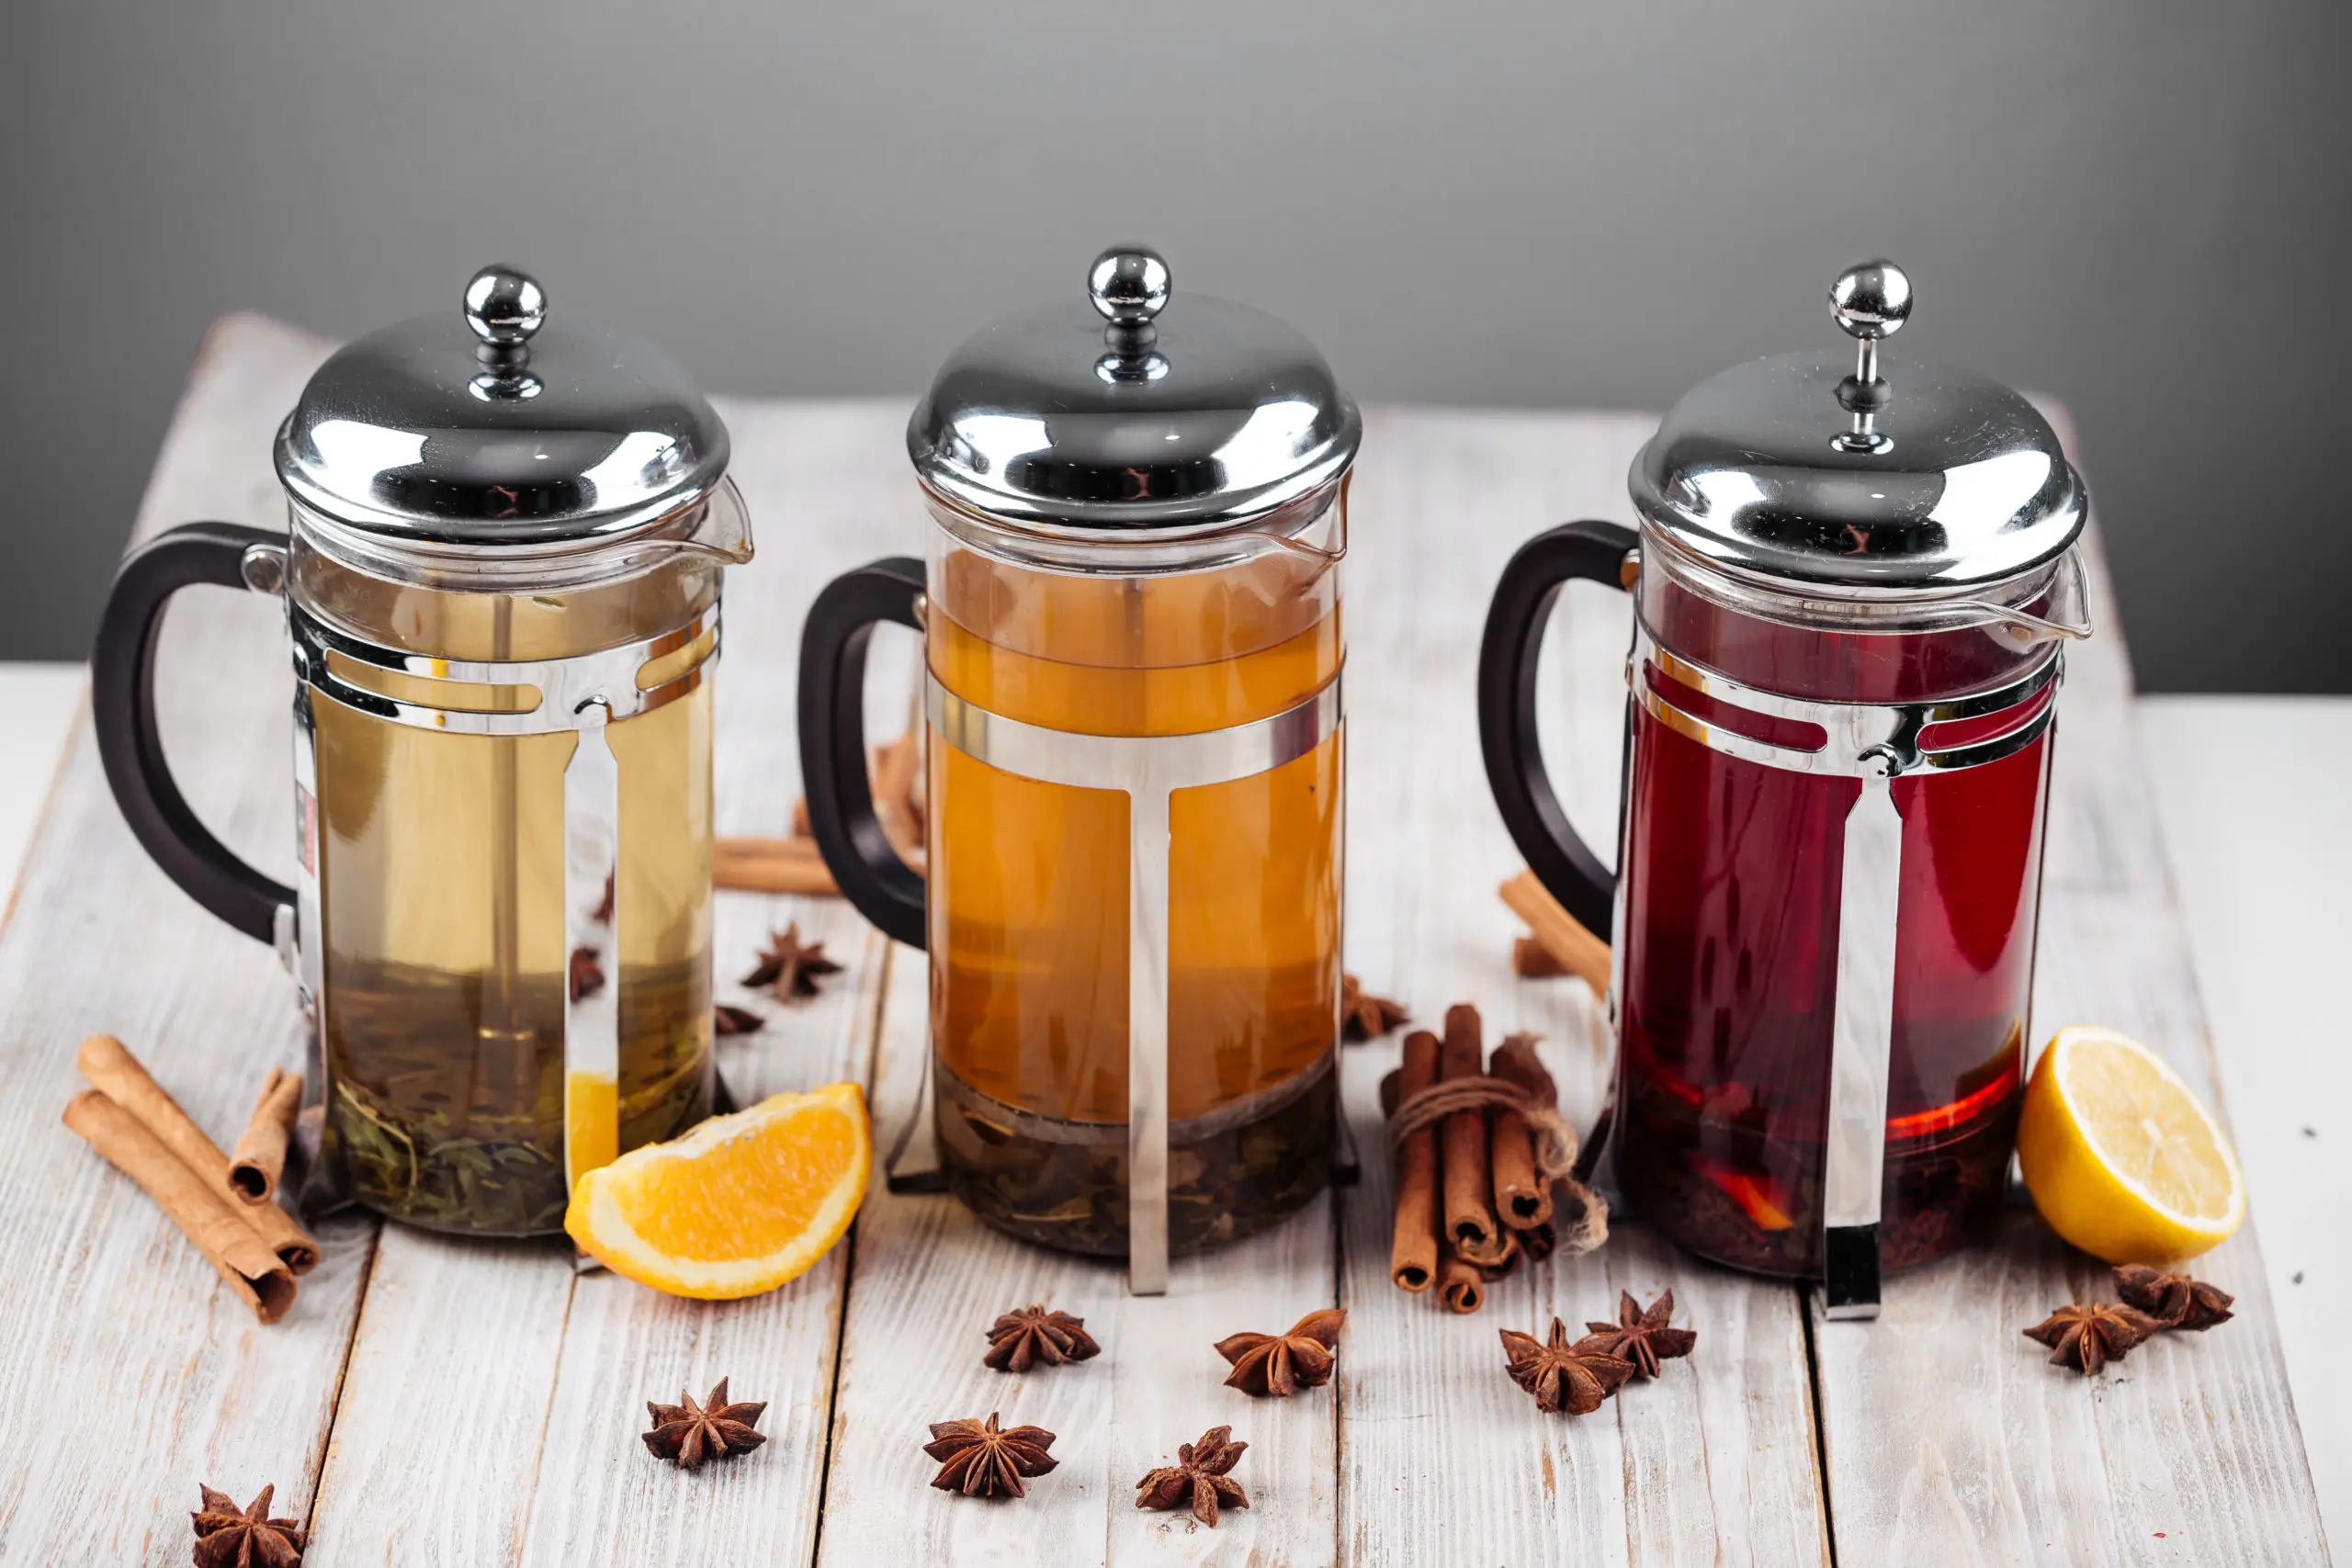 Different fruit teas in french press pots